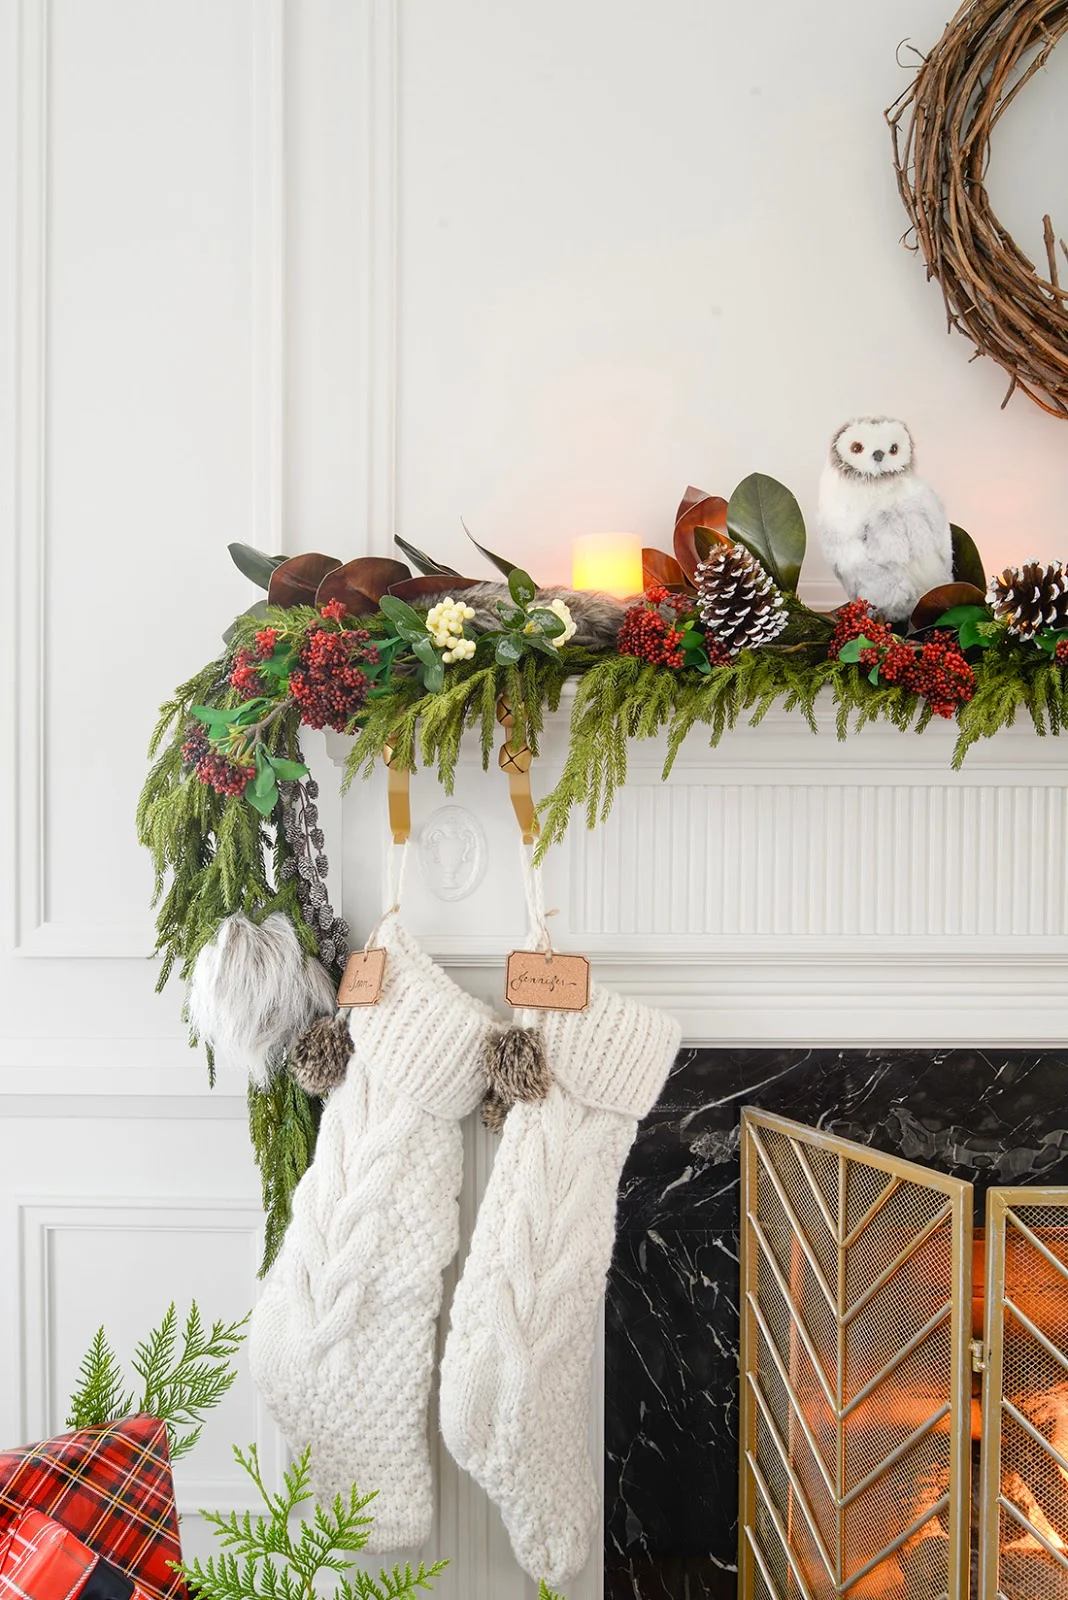 The Best Artificial Garlands For Christmas (2022) - Jenna Kate at Home